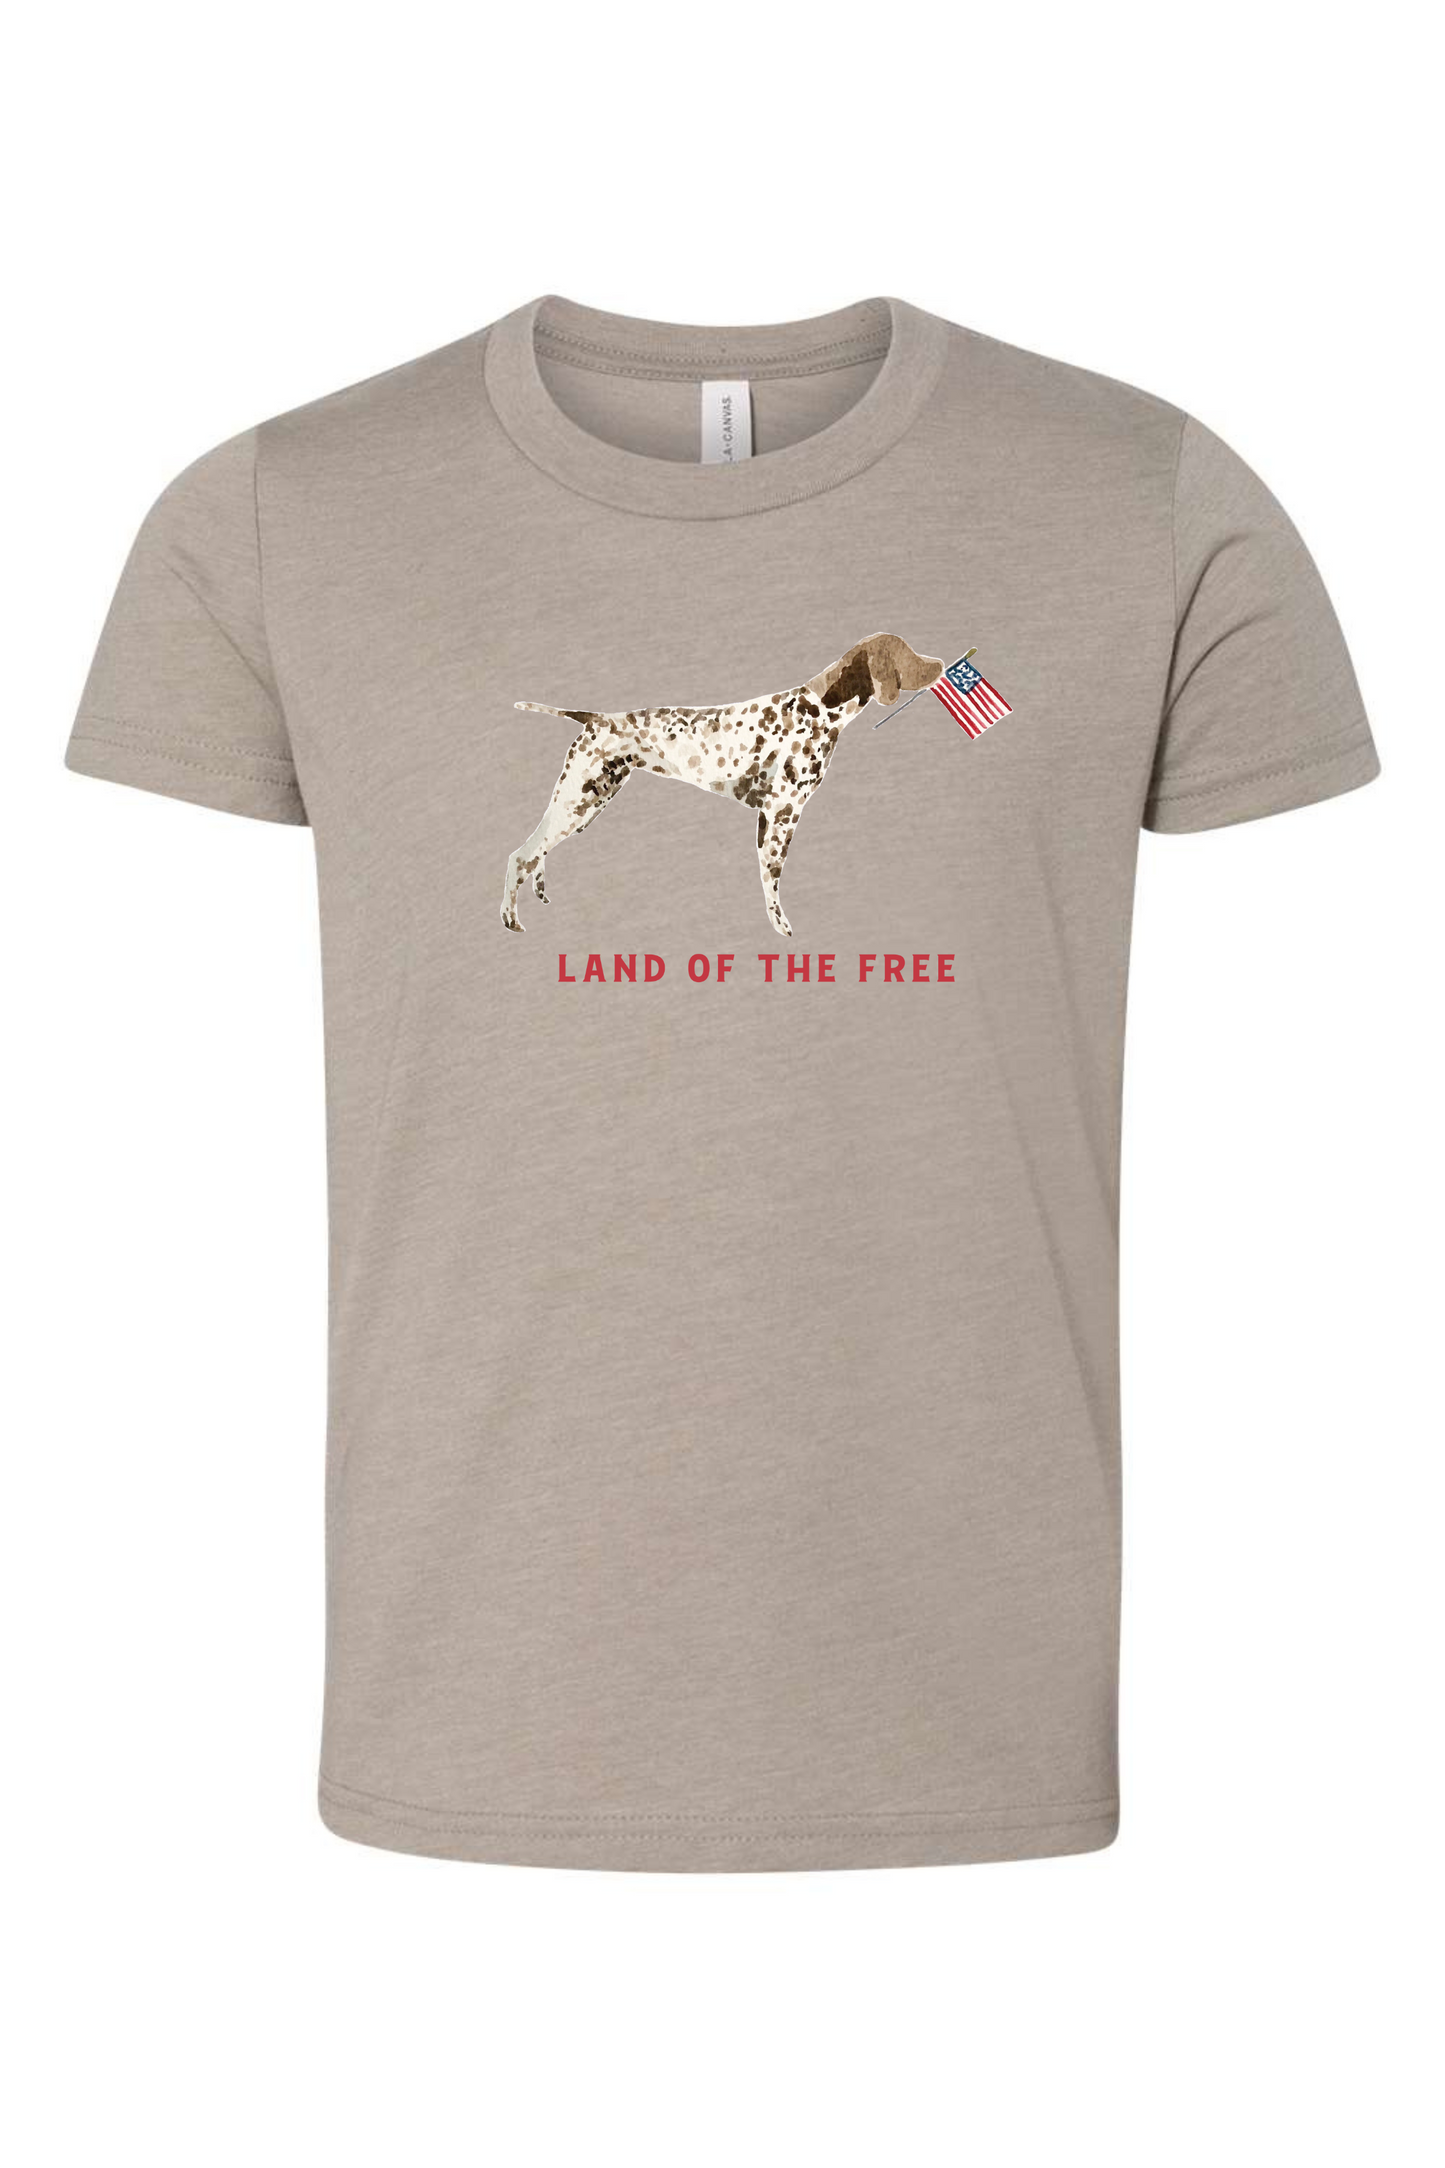 Land Of The Free Pup | Kids Tee | RTS-Kids Tees-Sister Shirts-Sister Shirts, Cute & Custom Tees for Mama & Littles in Trussville, Alabama.